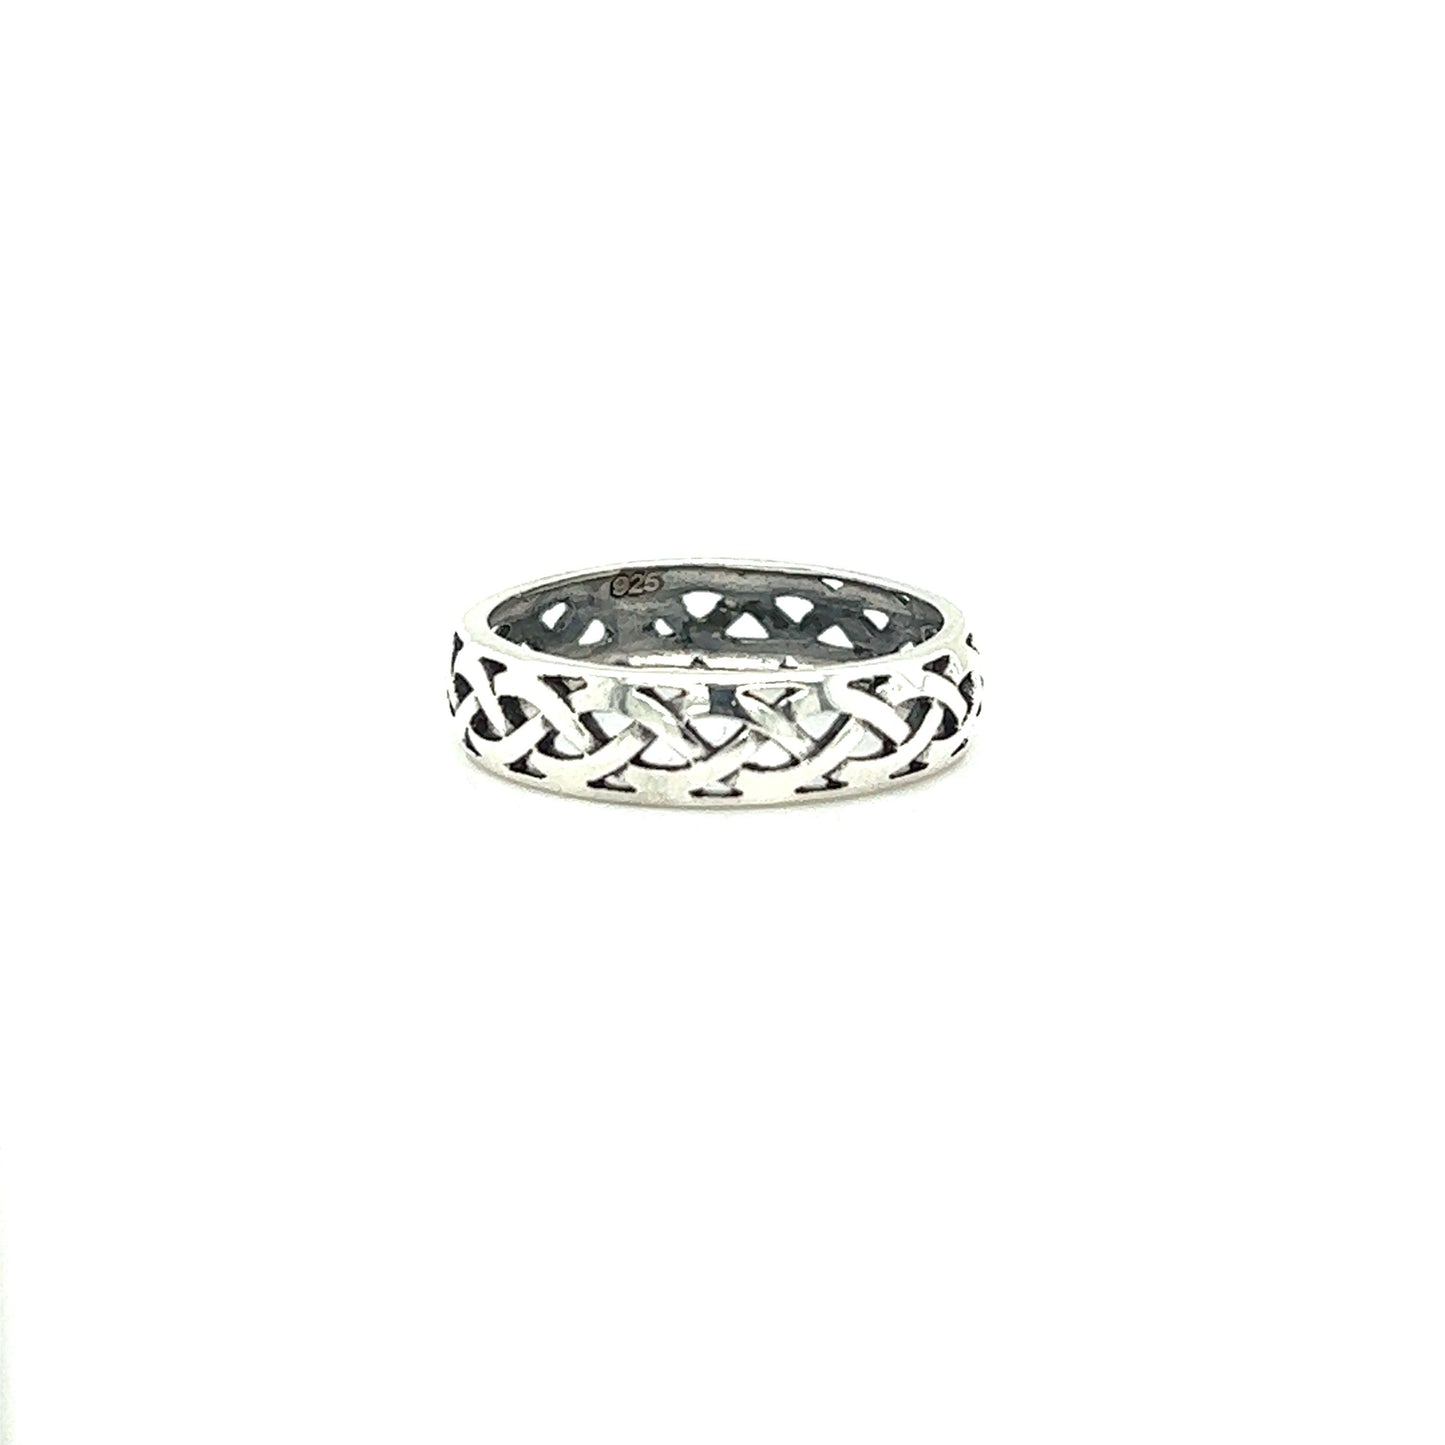 A silver band with a Celtic weave design.